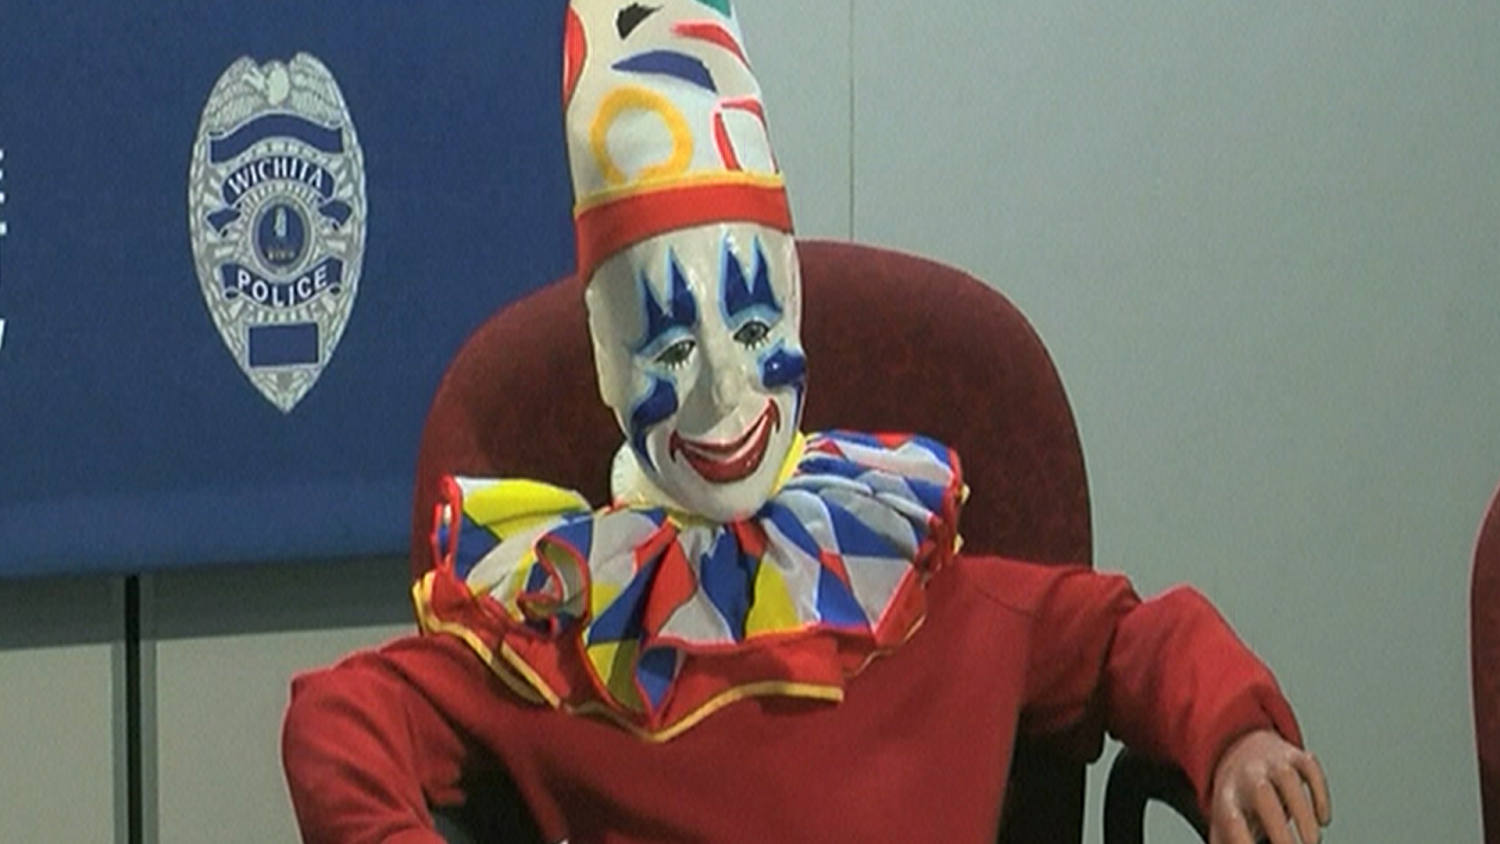 Missing Clown Found at Home of Sex Offender pic pic